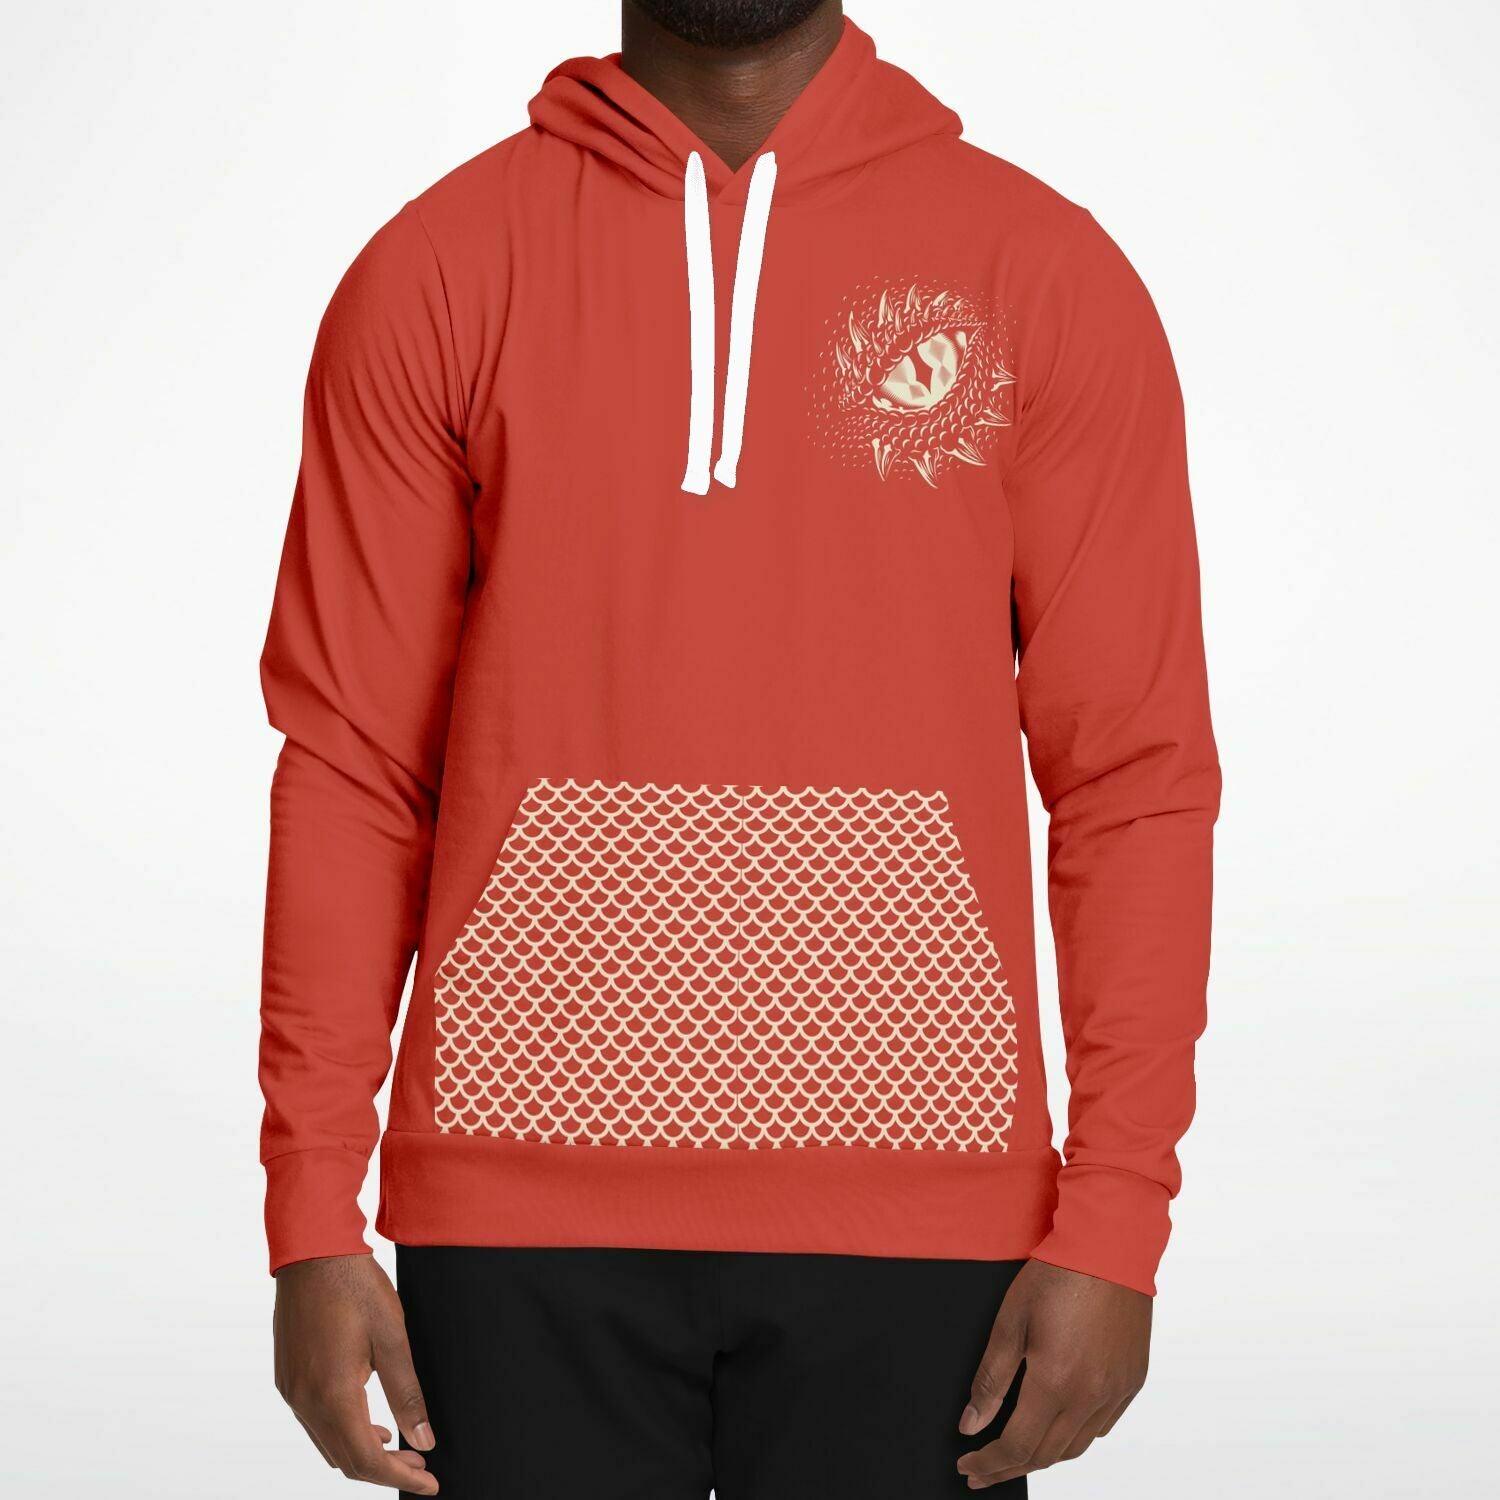 The Red Dragon Hoodie